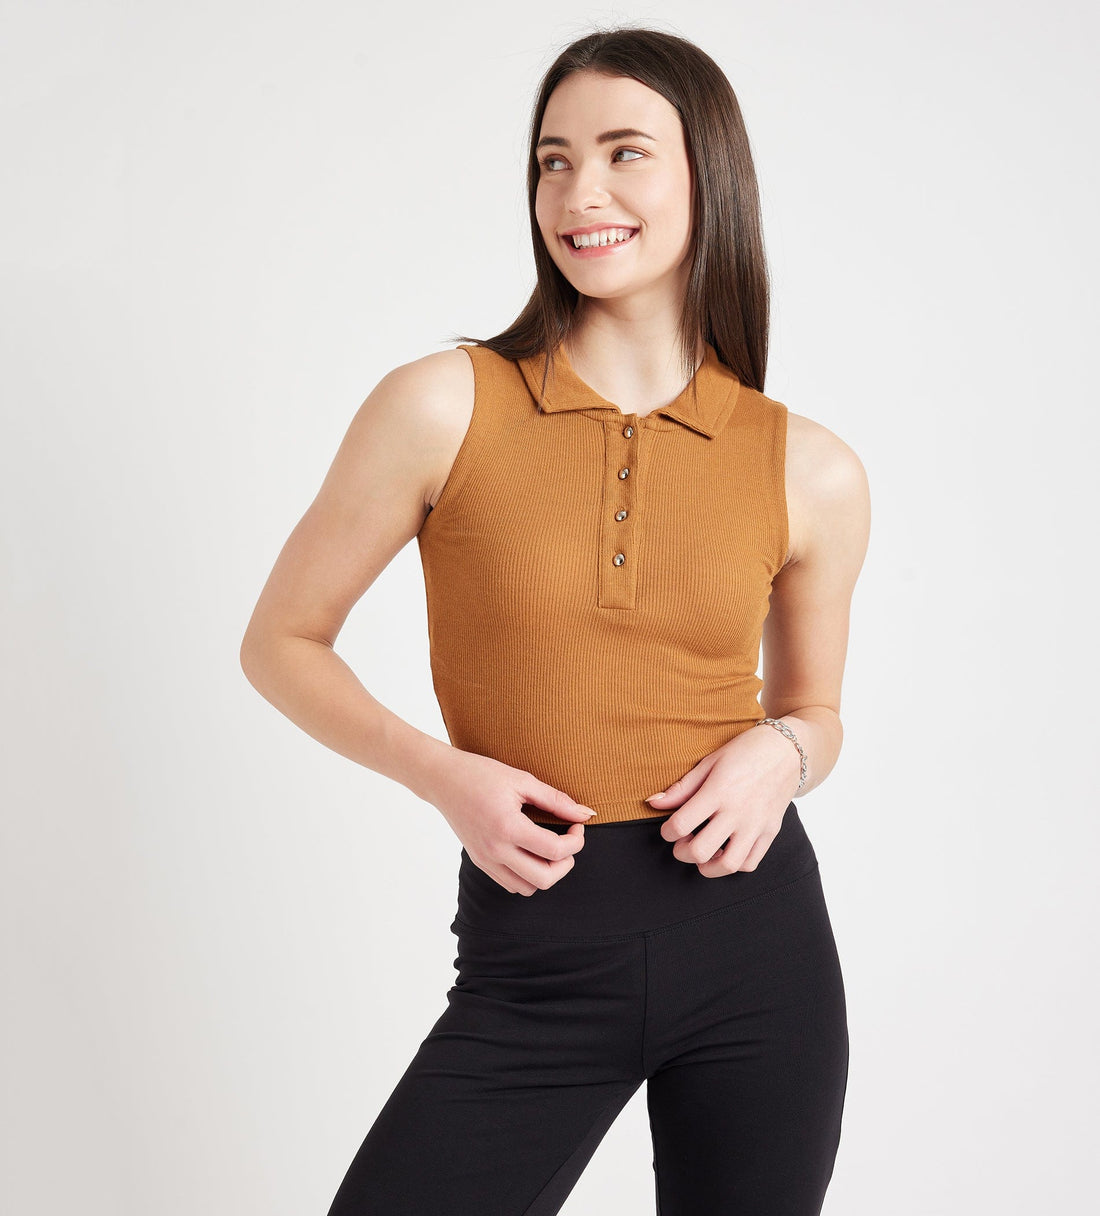 Tanks & Tops Crop Top Brown Polo Neck Tank Top For Womens